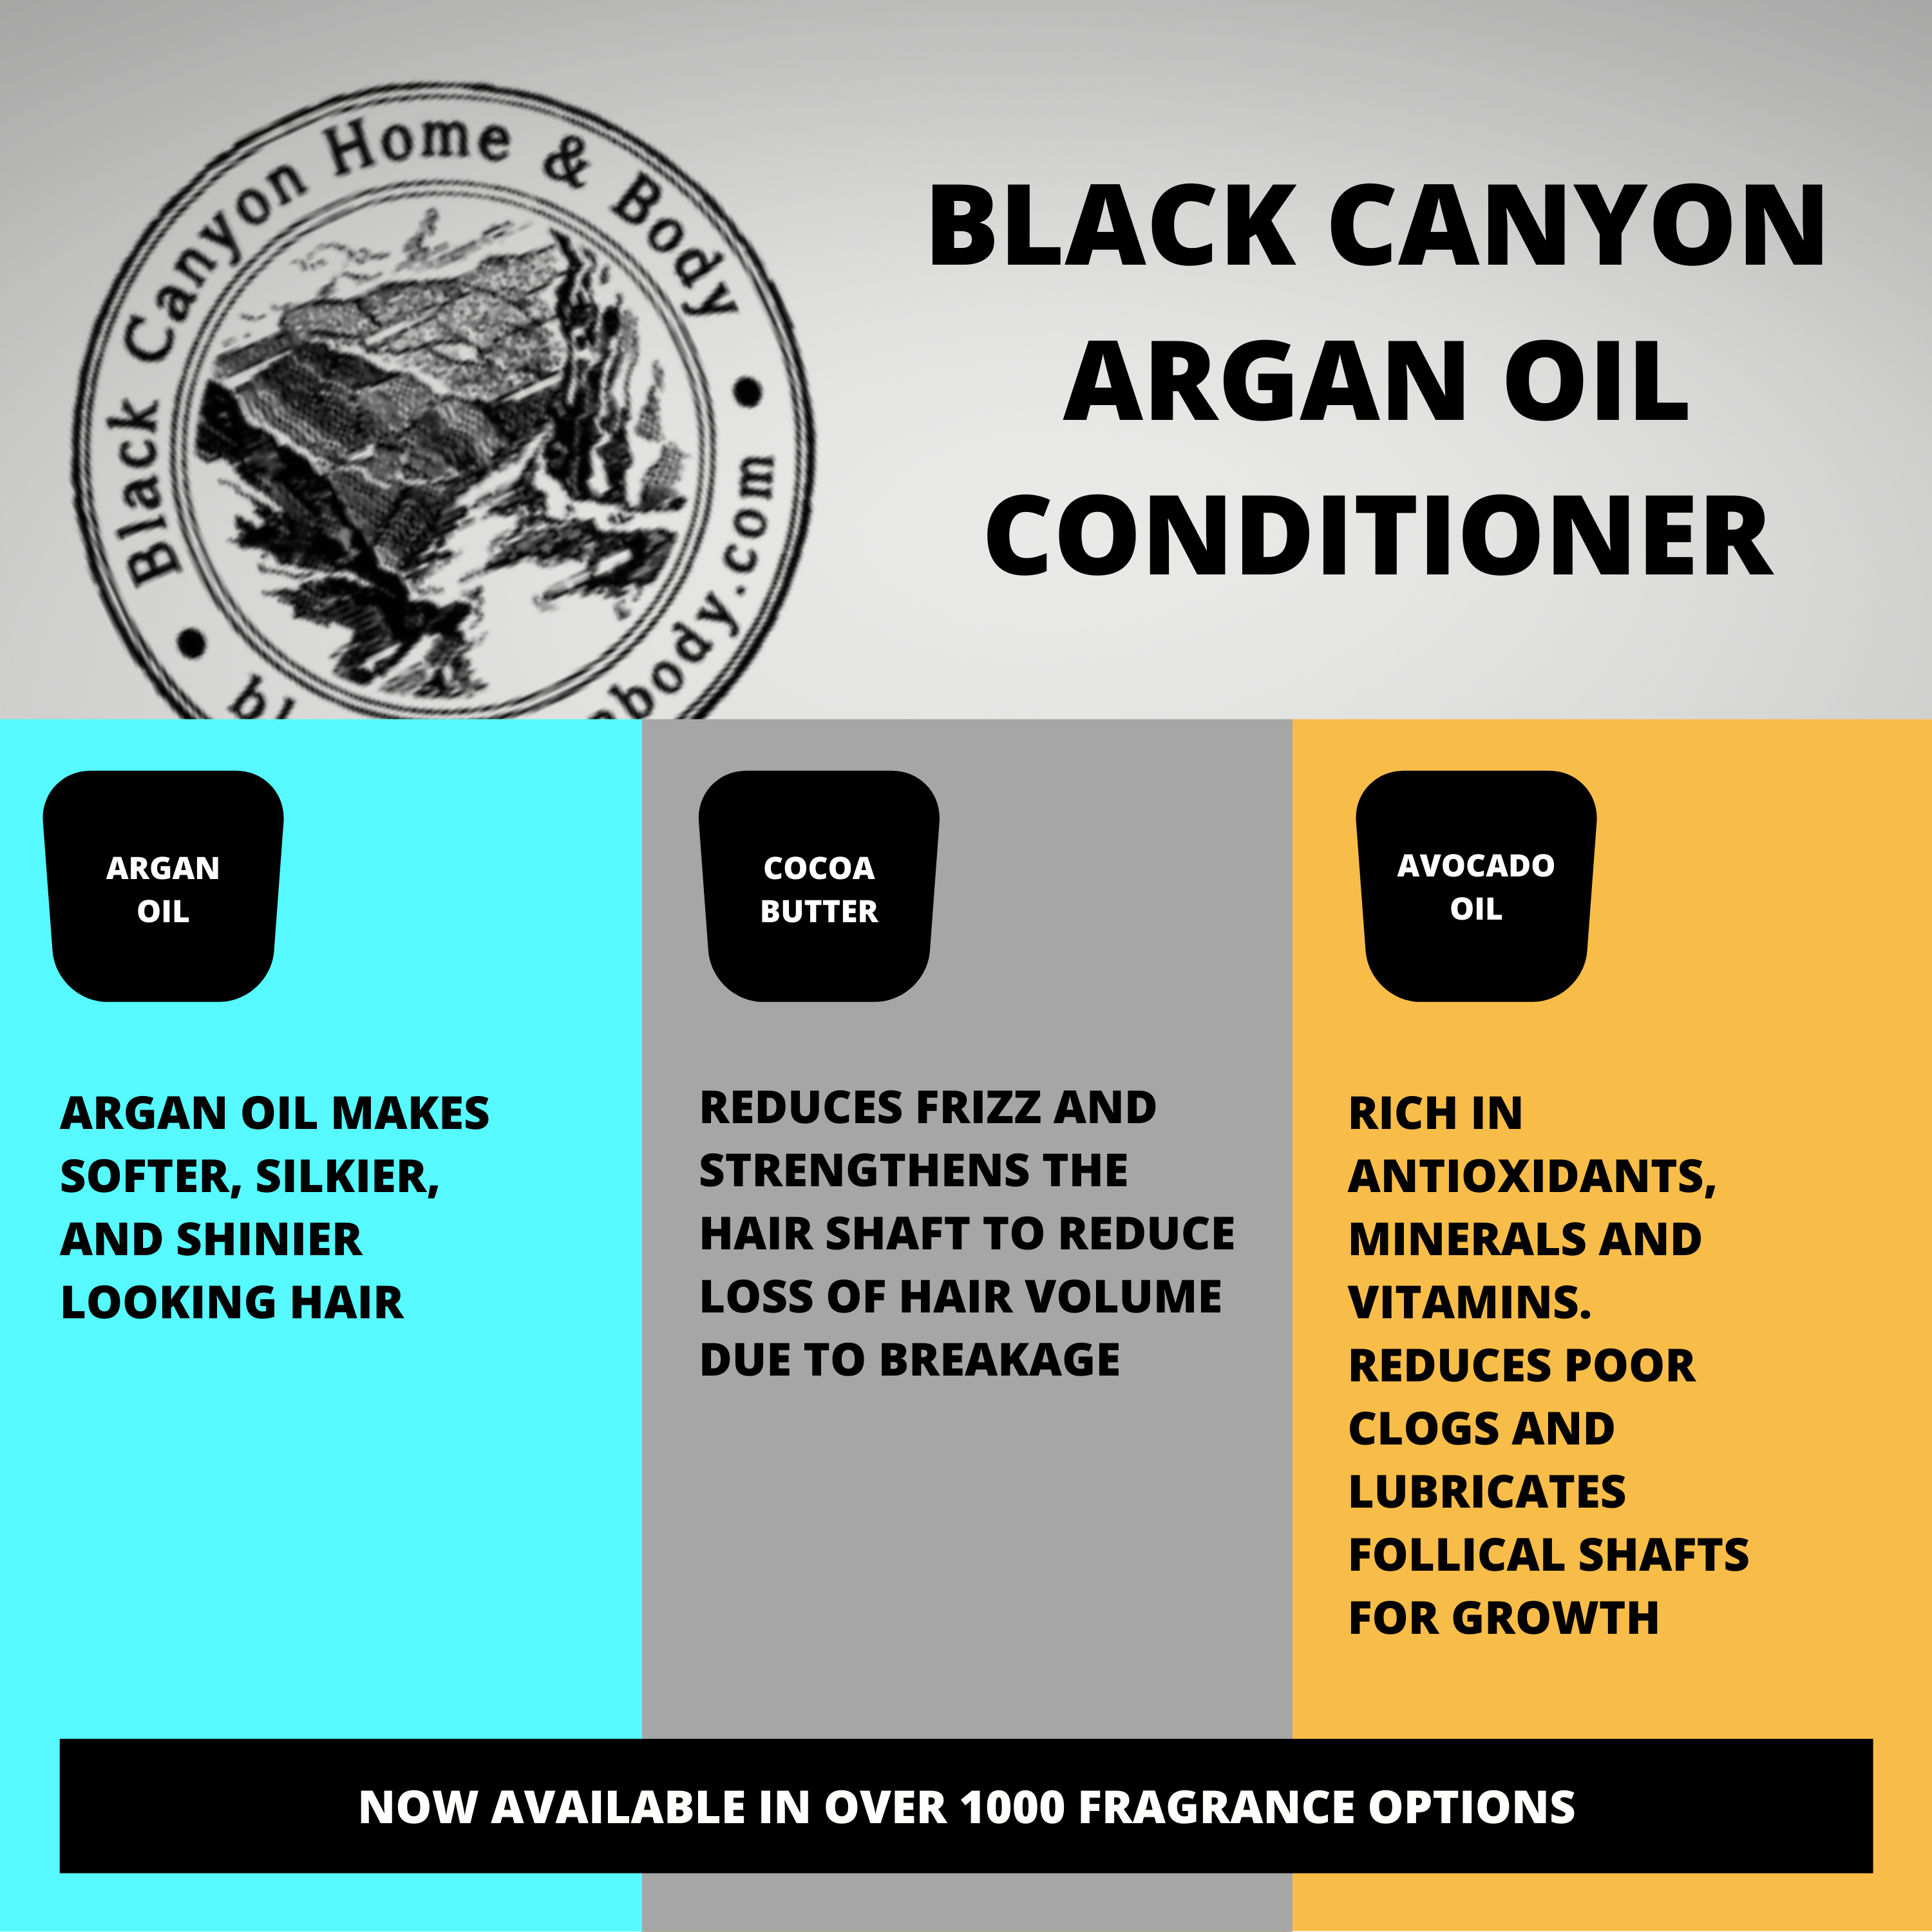 Black Canyon Lemongrass & Clove Scented Conditioner with Argan Oil